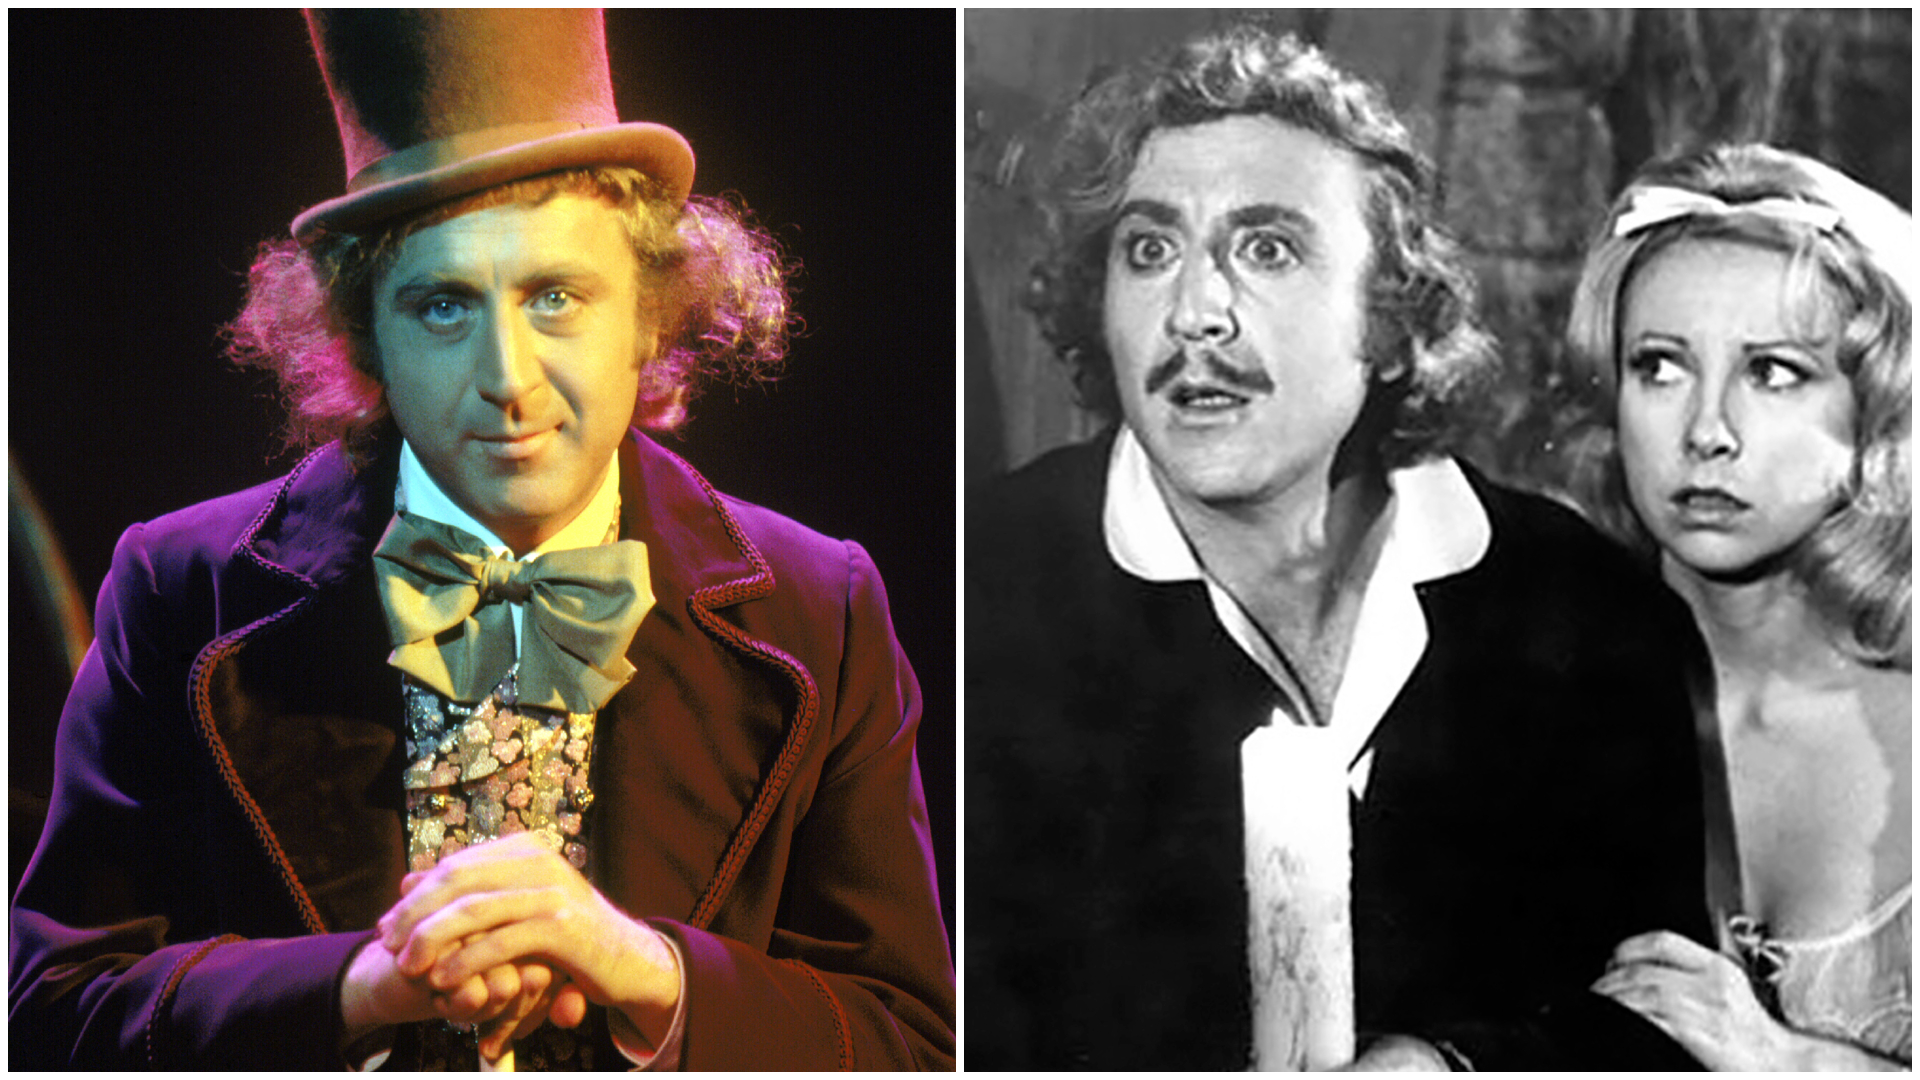 Mel Brooks says Gene Wilder wanted to keep filming Young Frankenstein